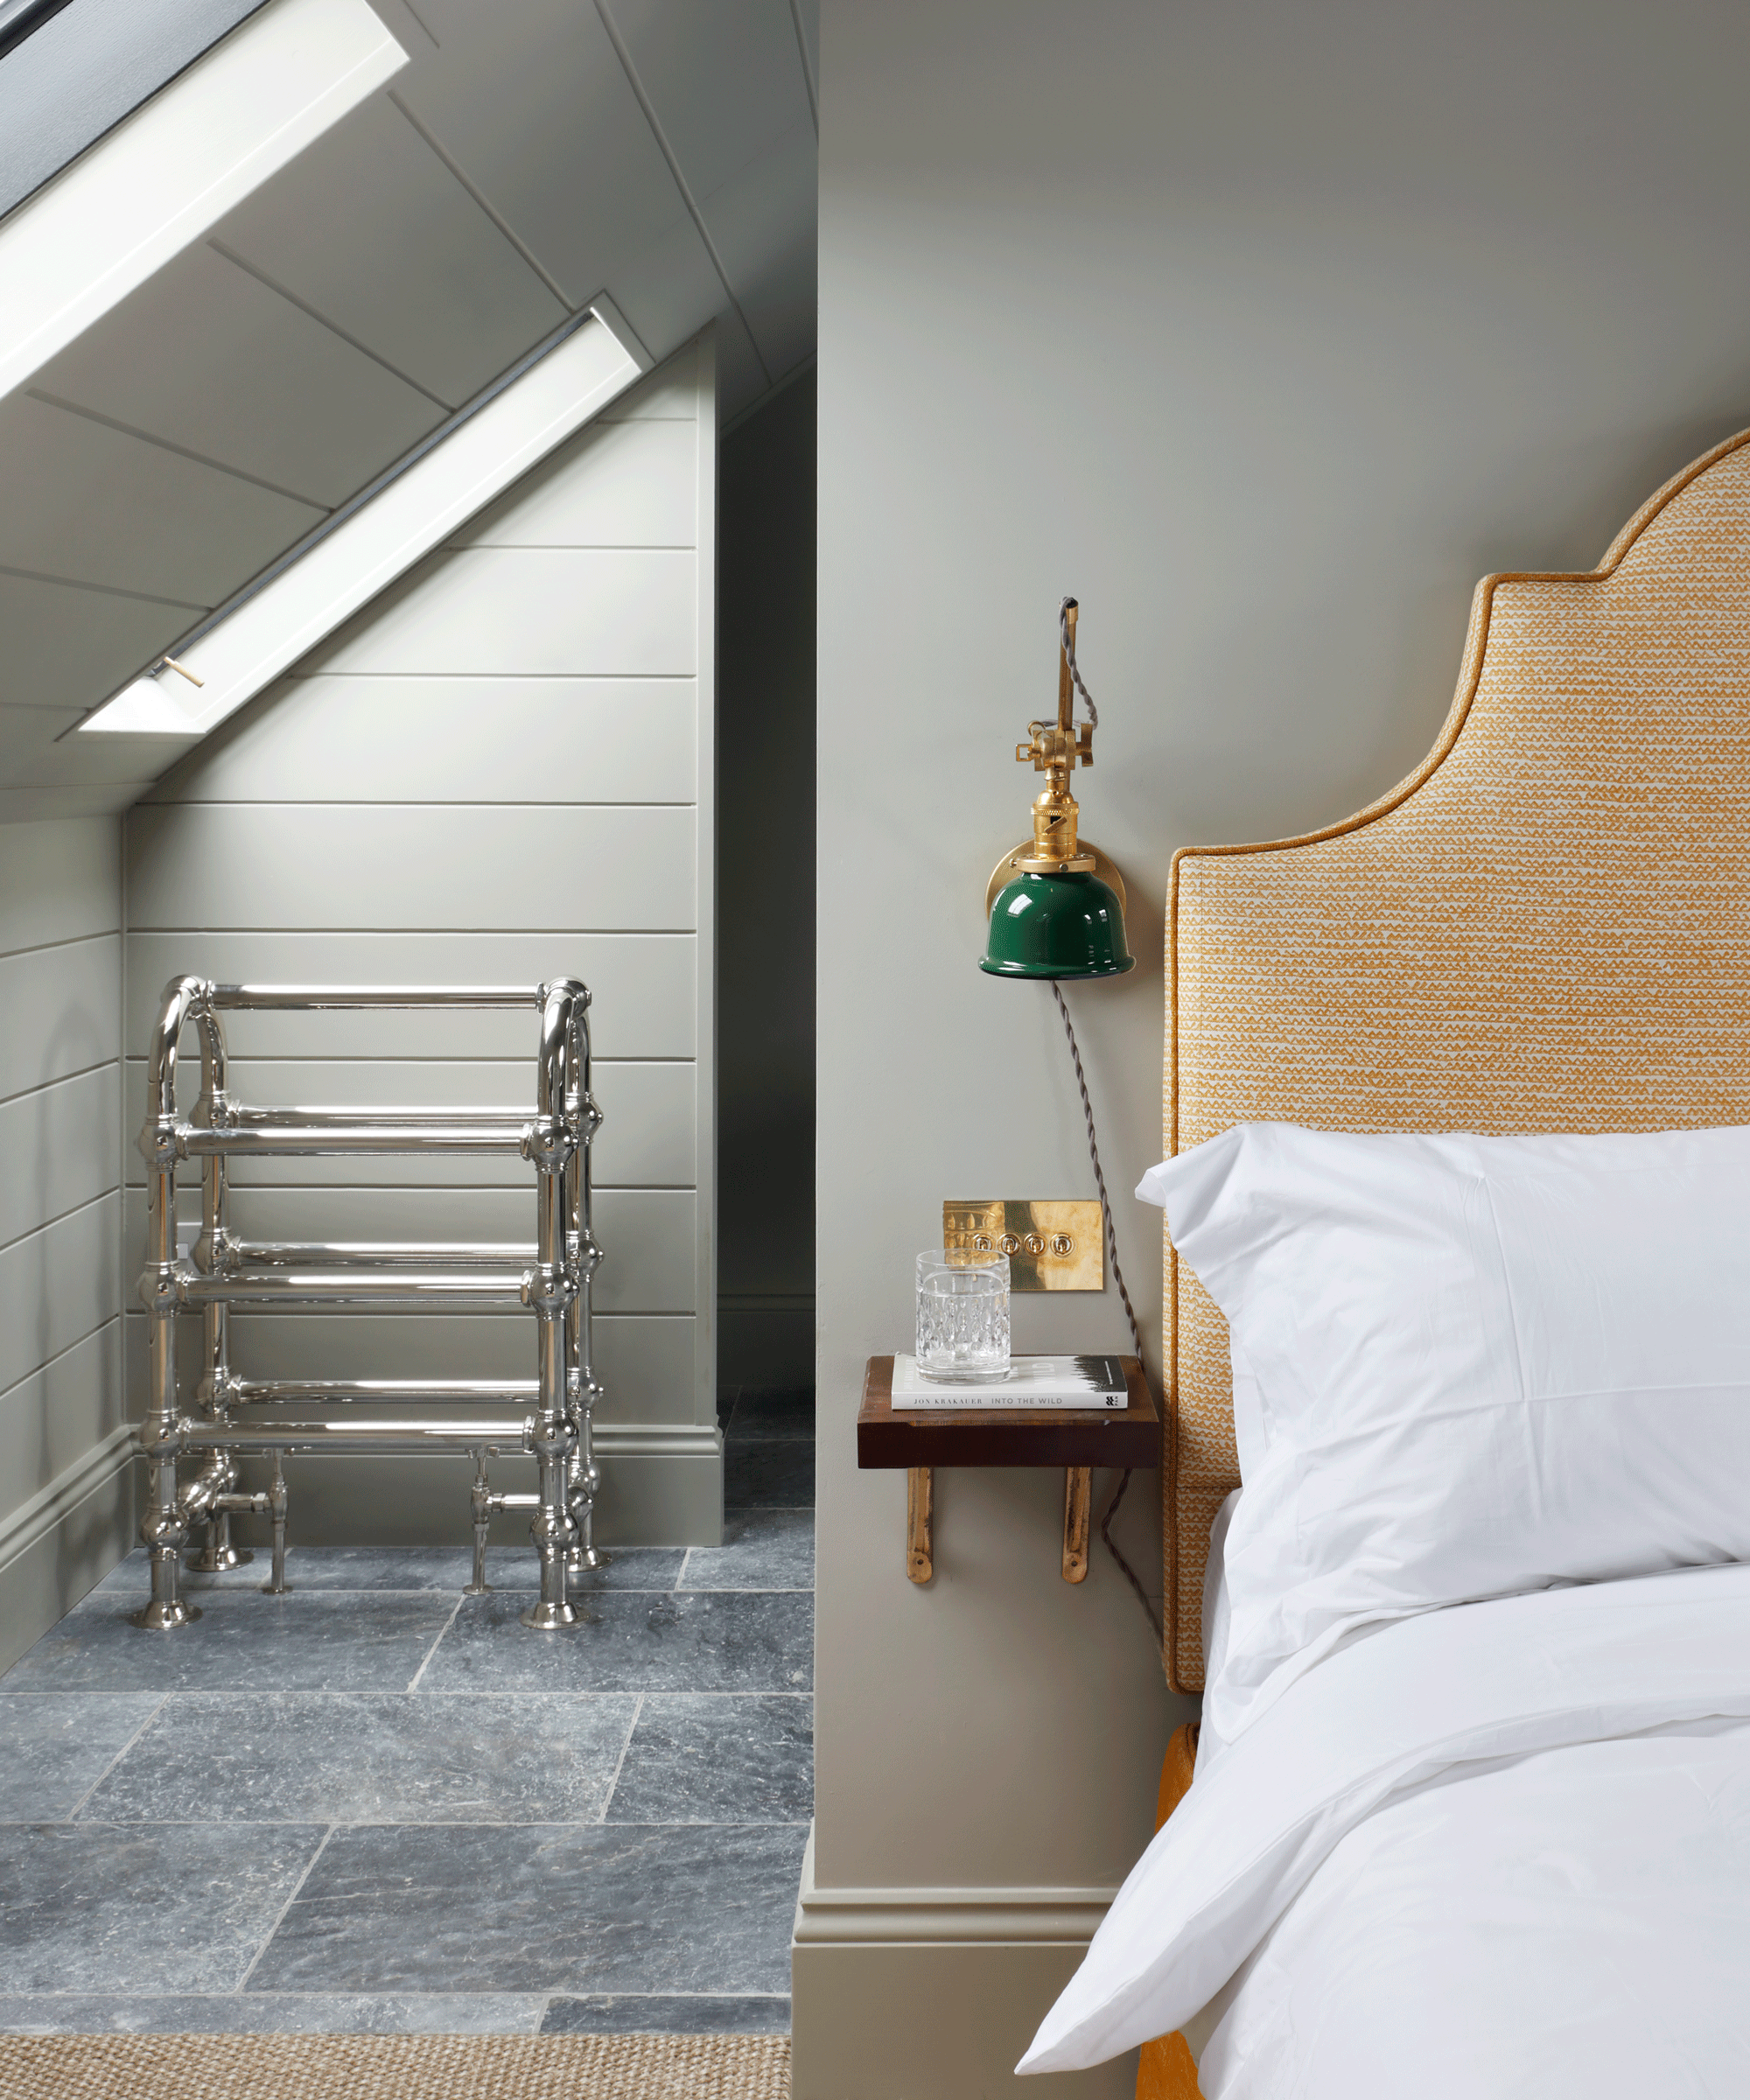 Bed in attic room painted Pigeon by Farrow & Ball